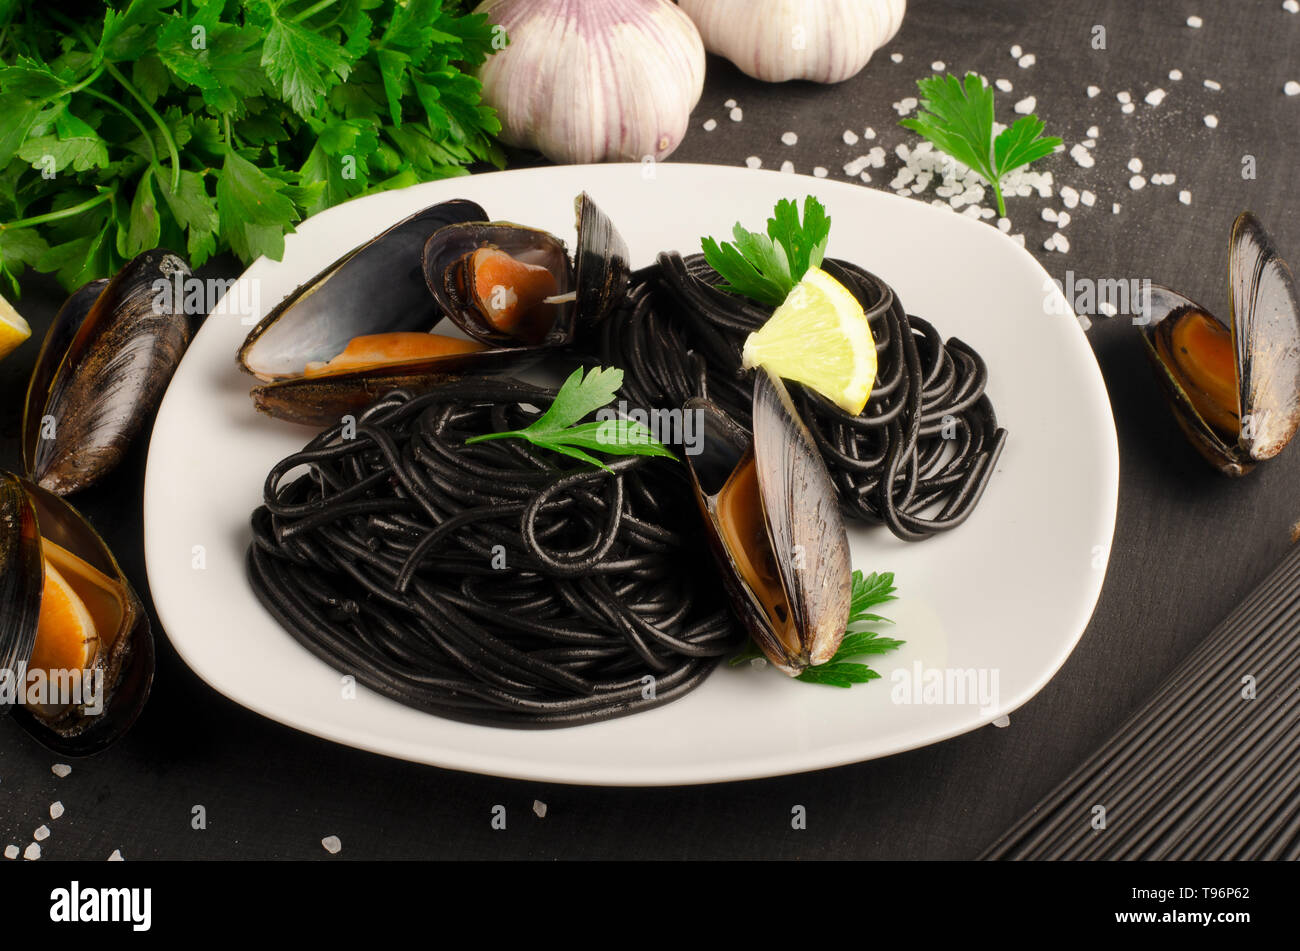 Seafood black pasta spaghetti with mussels on white plate on dark background.  Mediterranean delicacy food Stock Photo